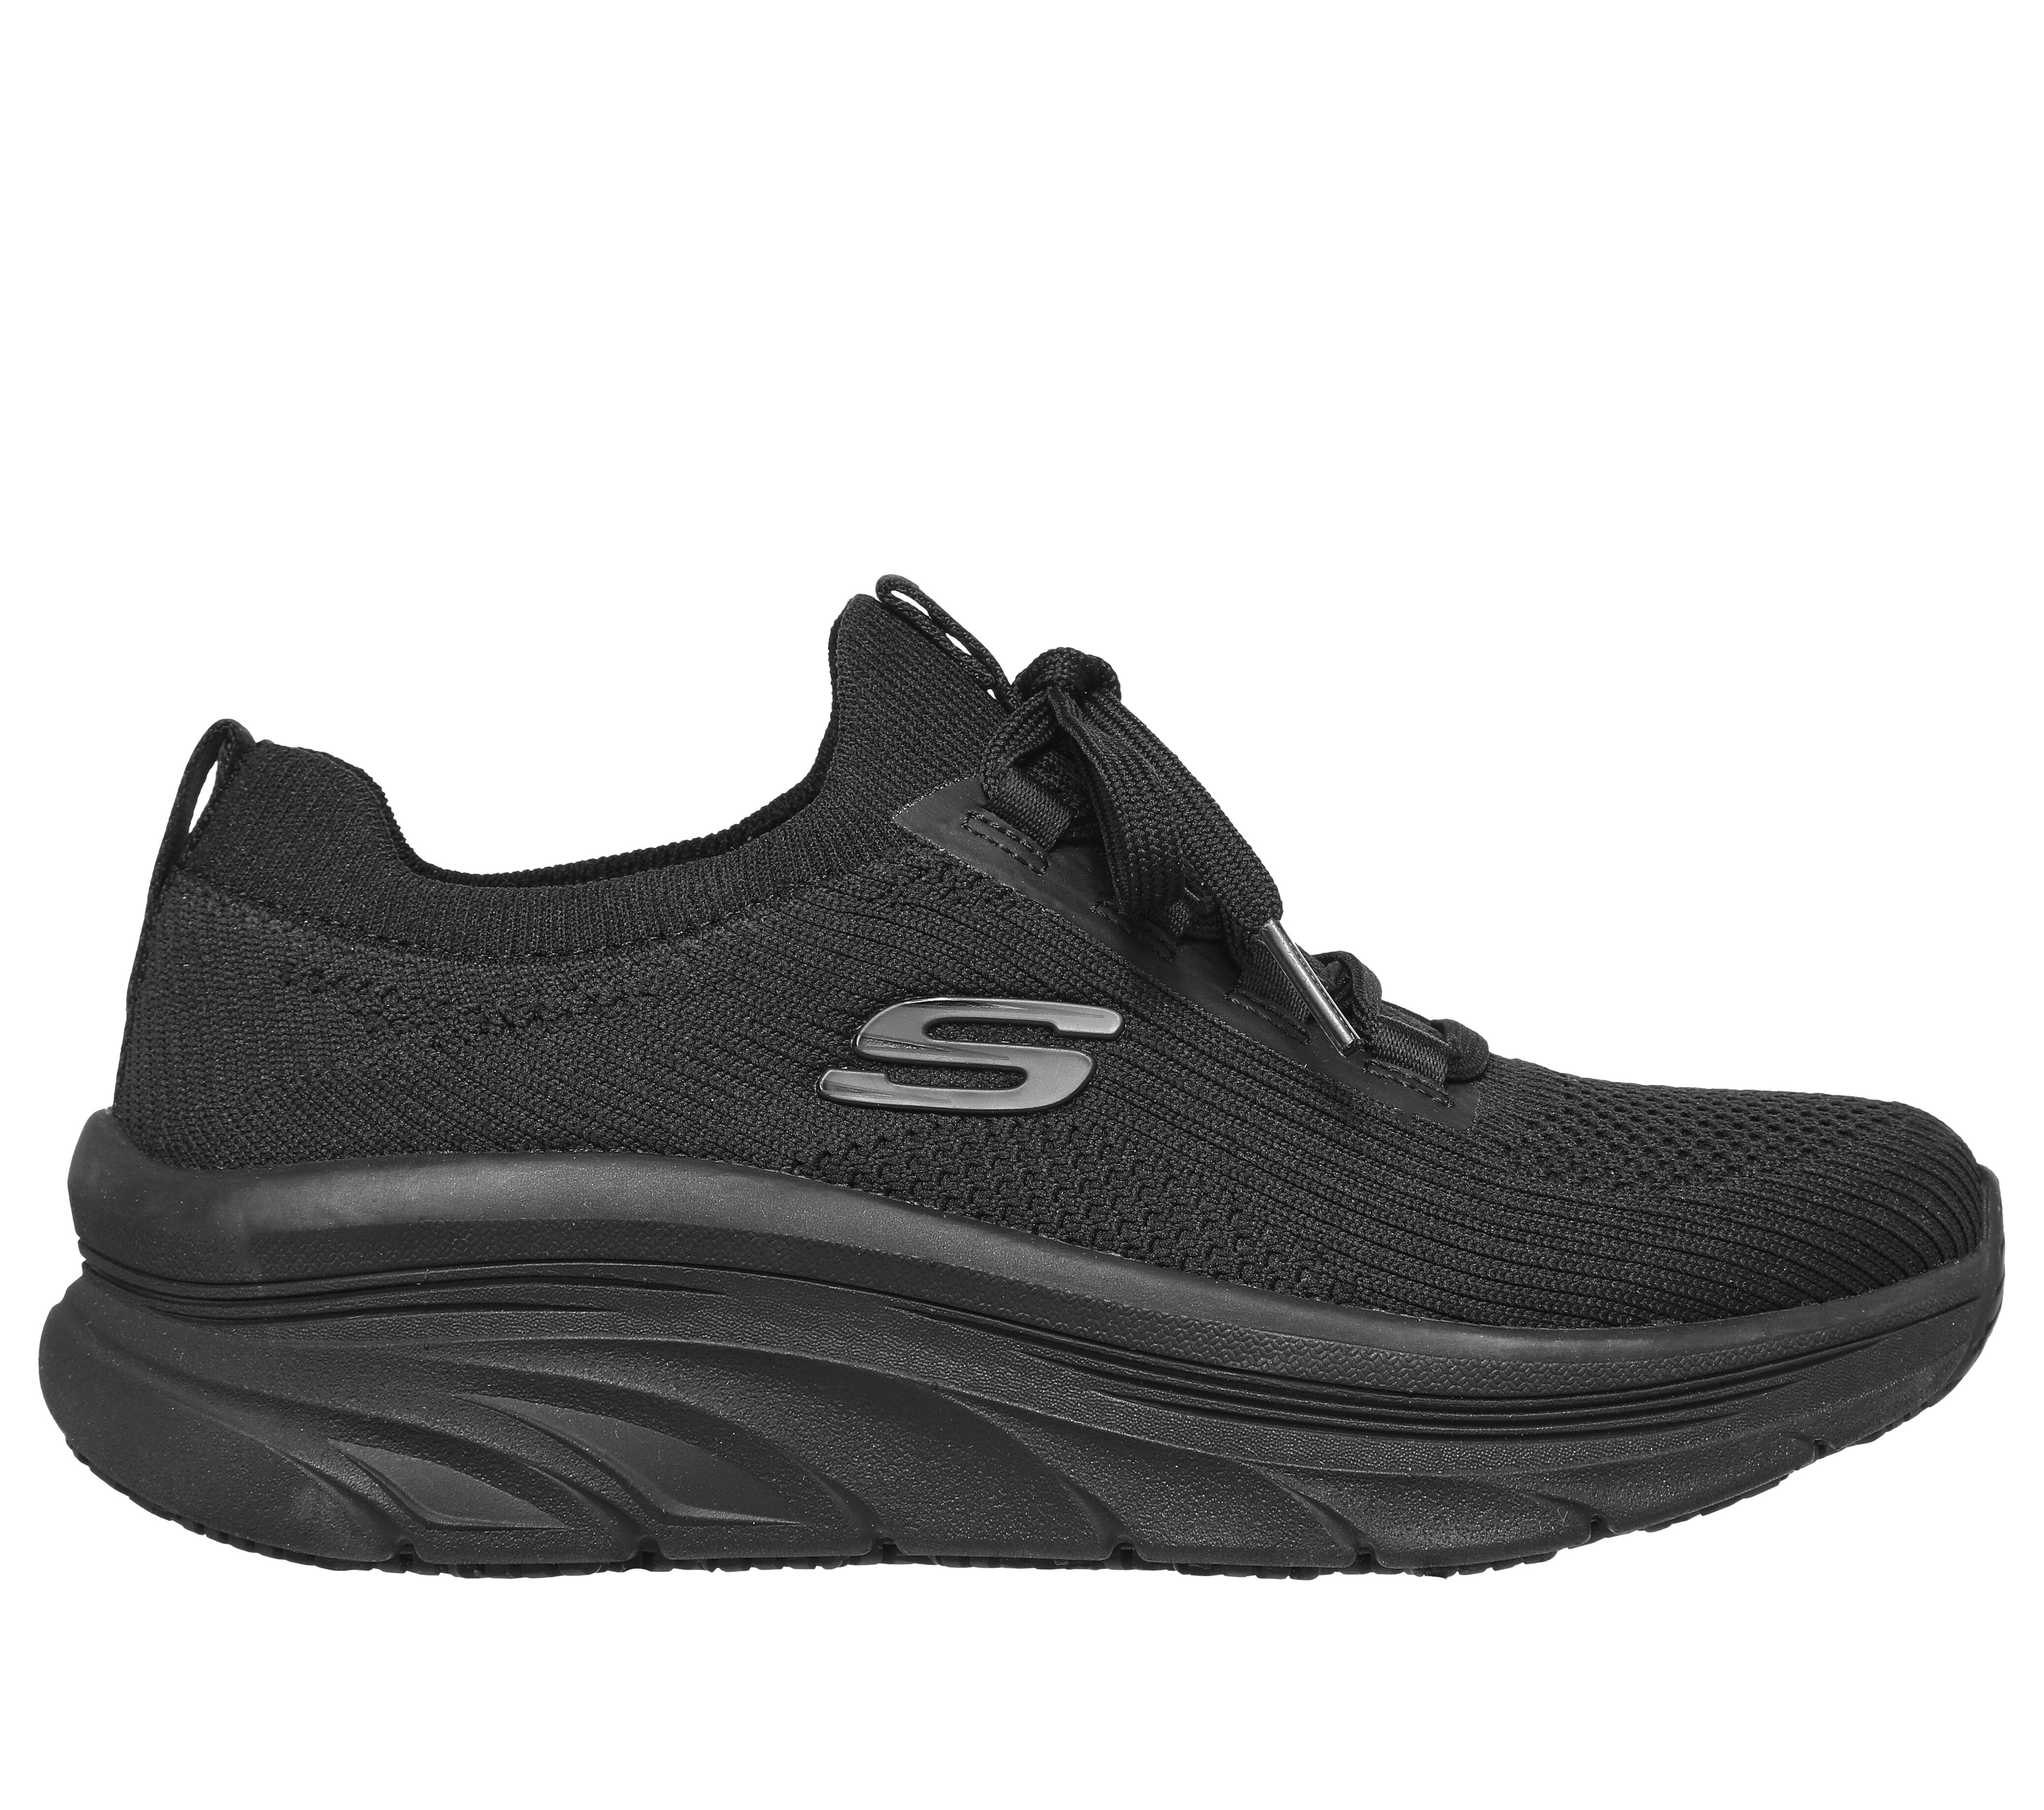 skechers slip on shoes canada